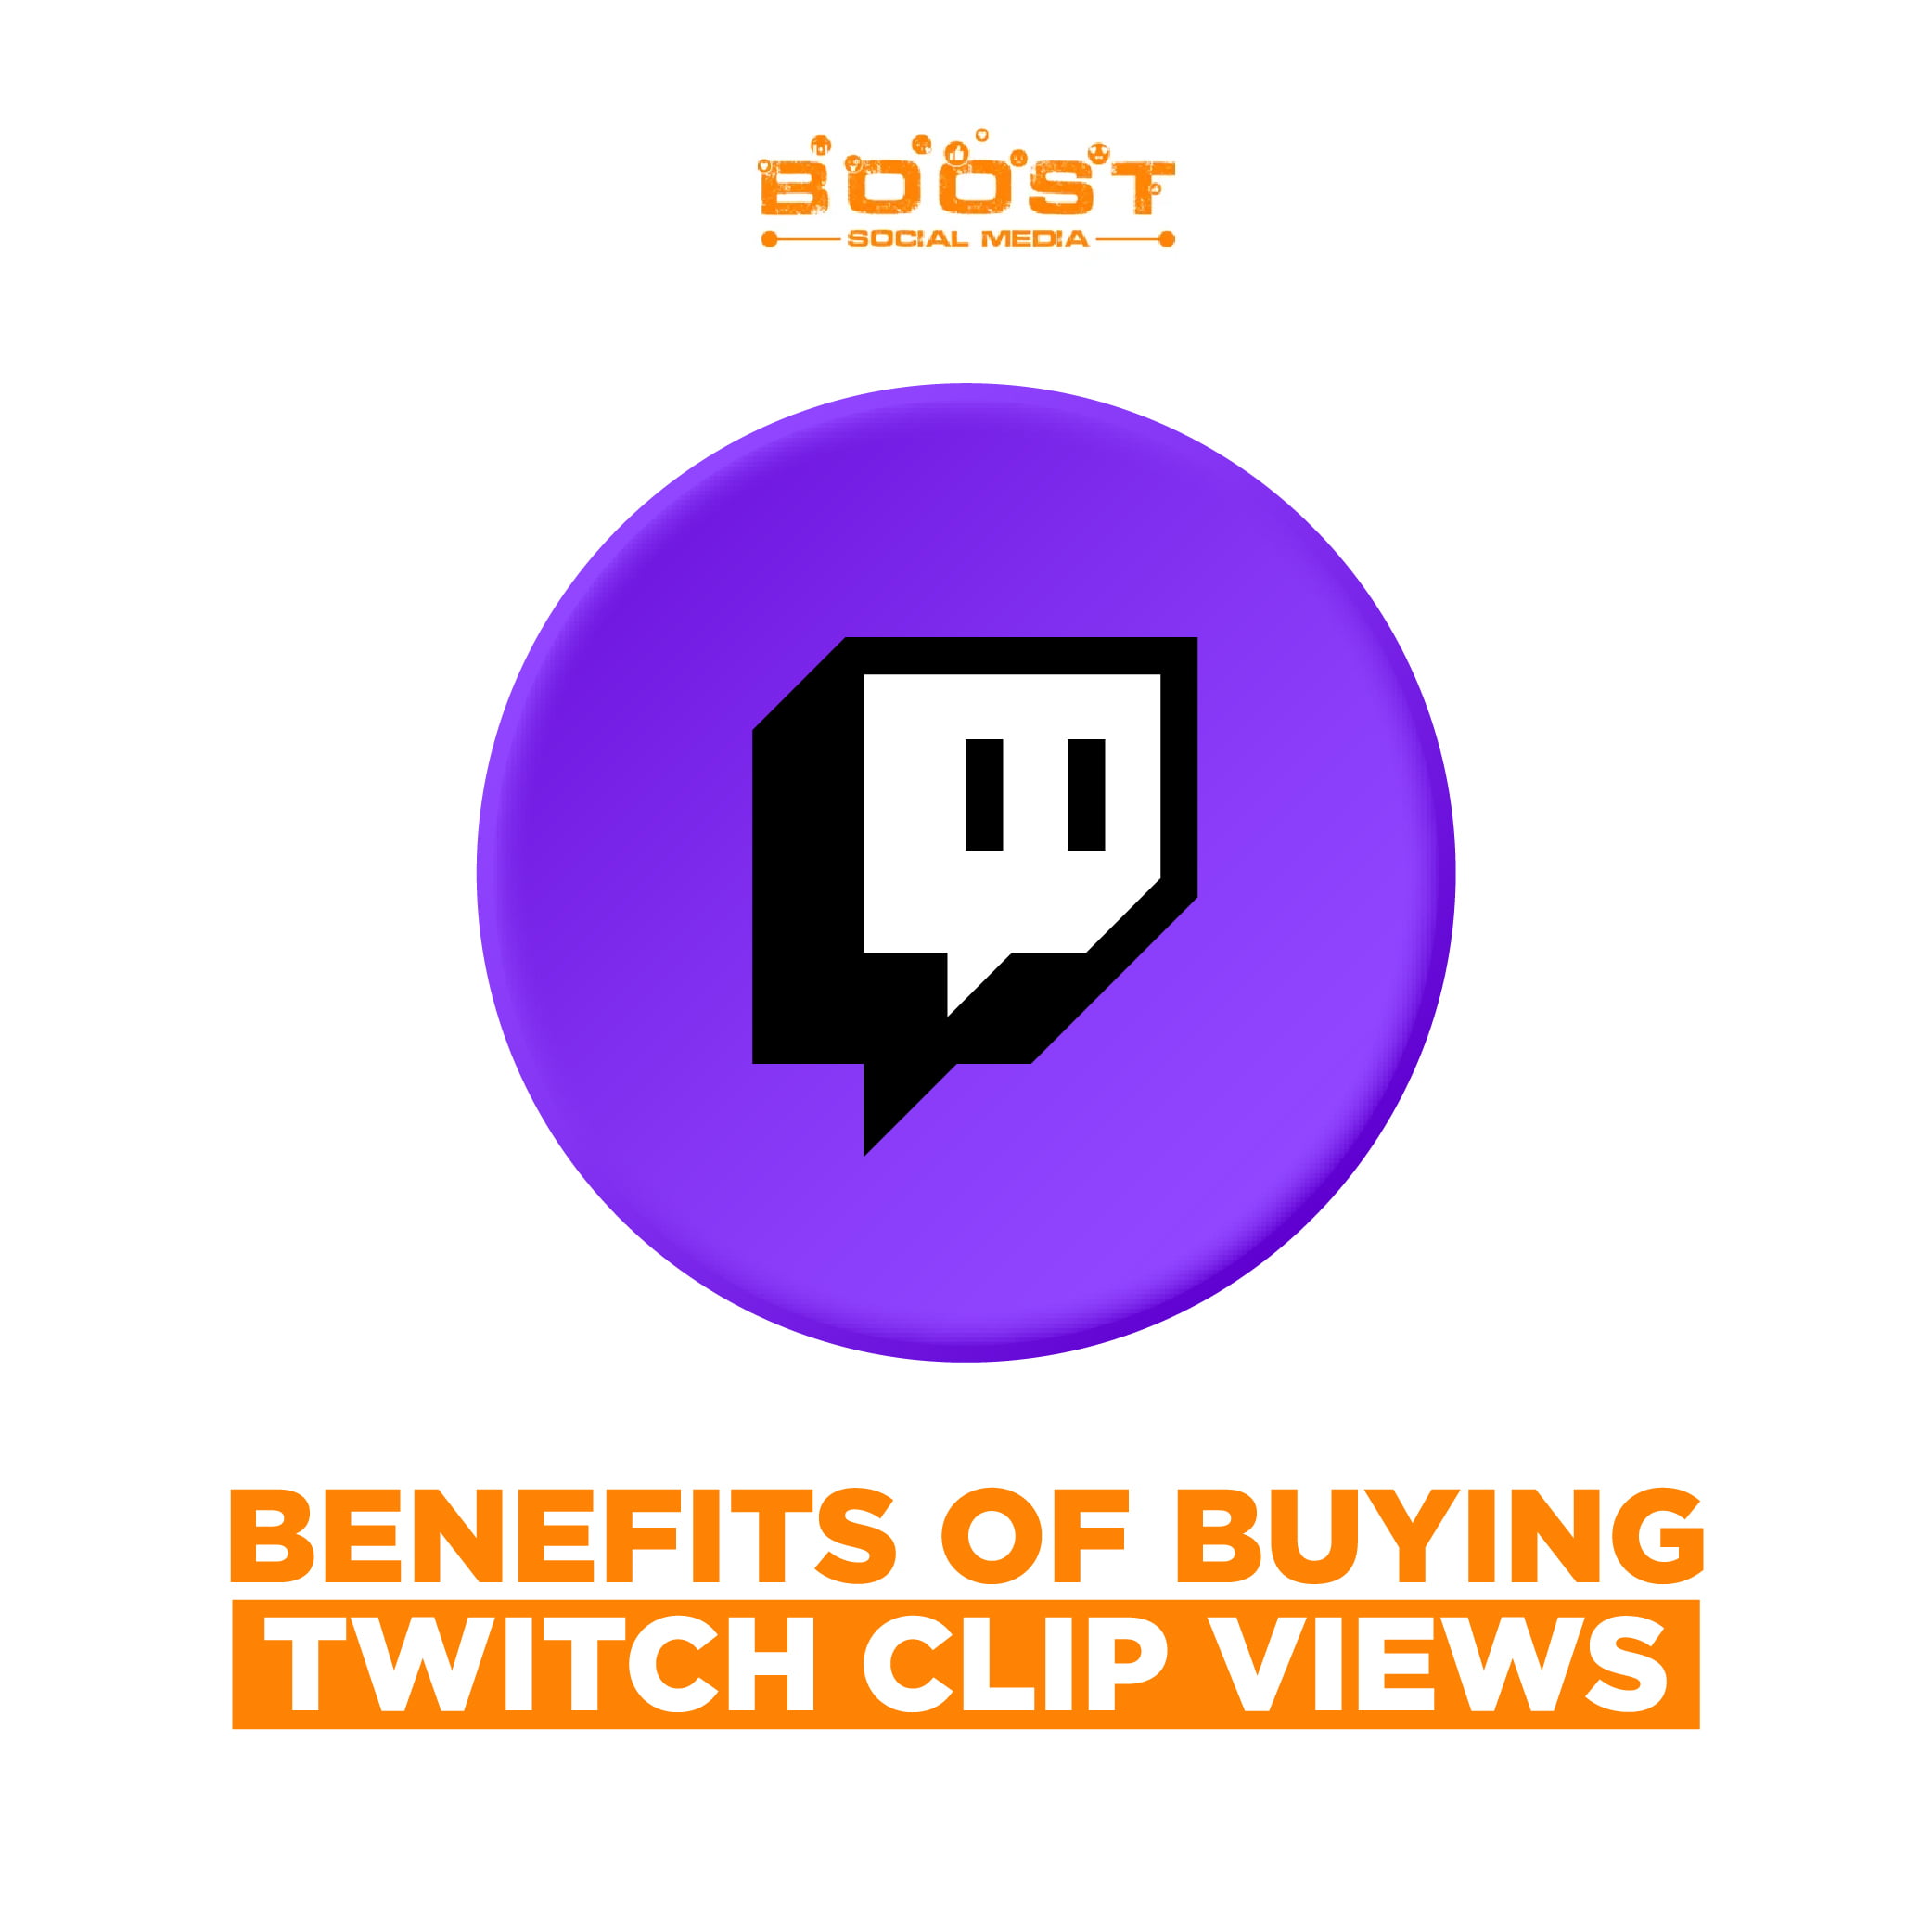 Benefites of Buying Twitch Clip Views